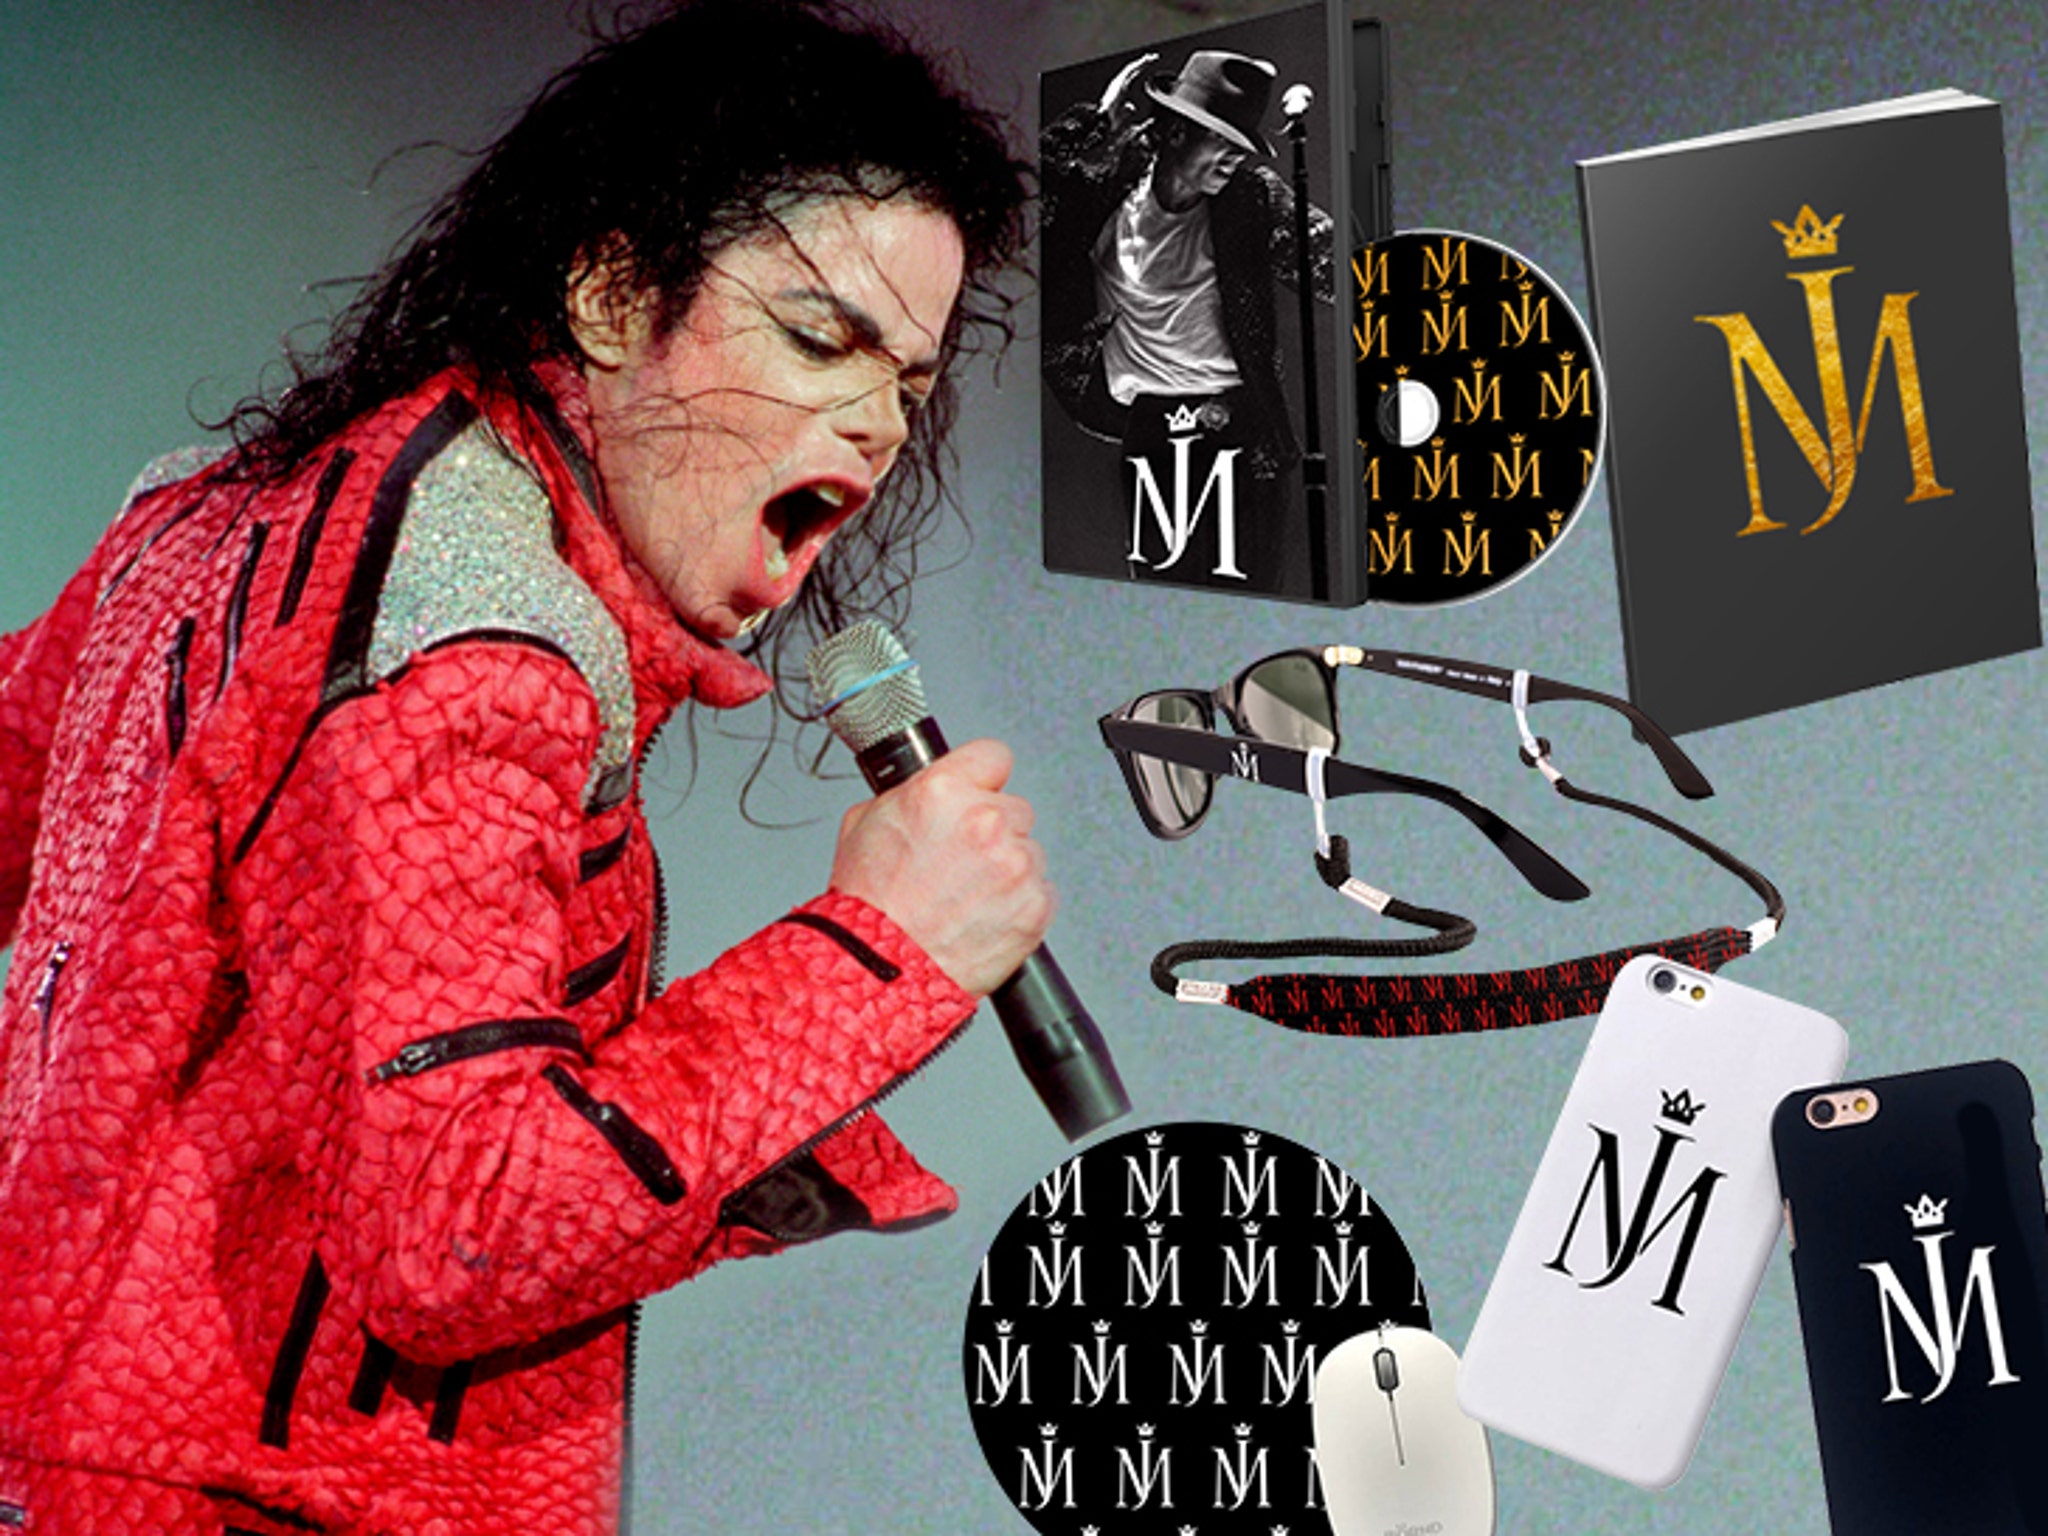 Hear Ne-Yo's King of Pop Playlist Featuring His Favorite MJ Classics Only  On SiriusXM - Michael Jackson Official Site